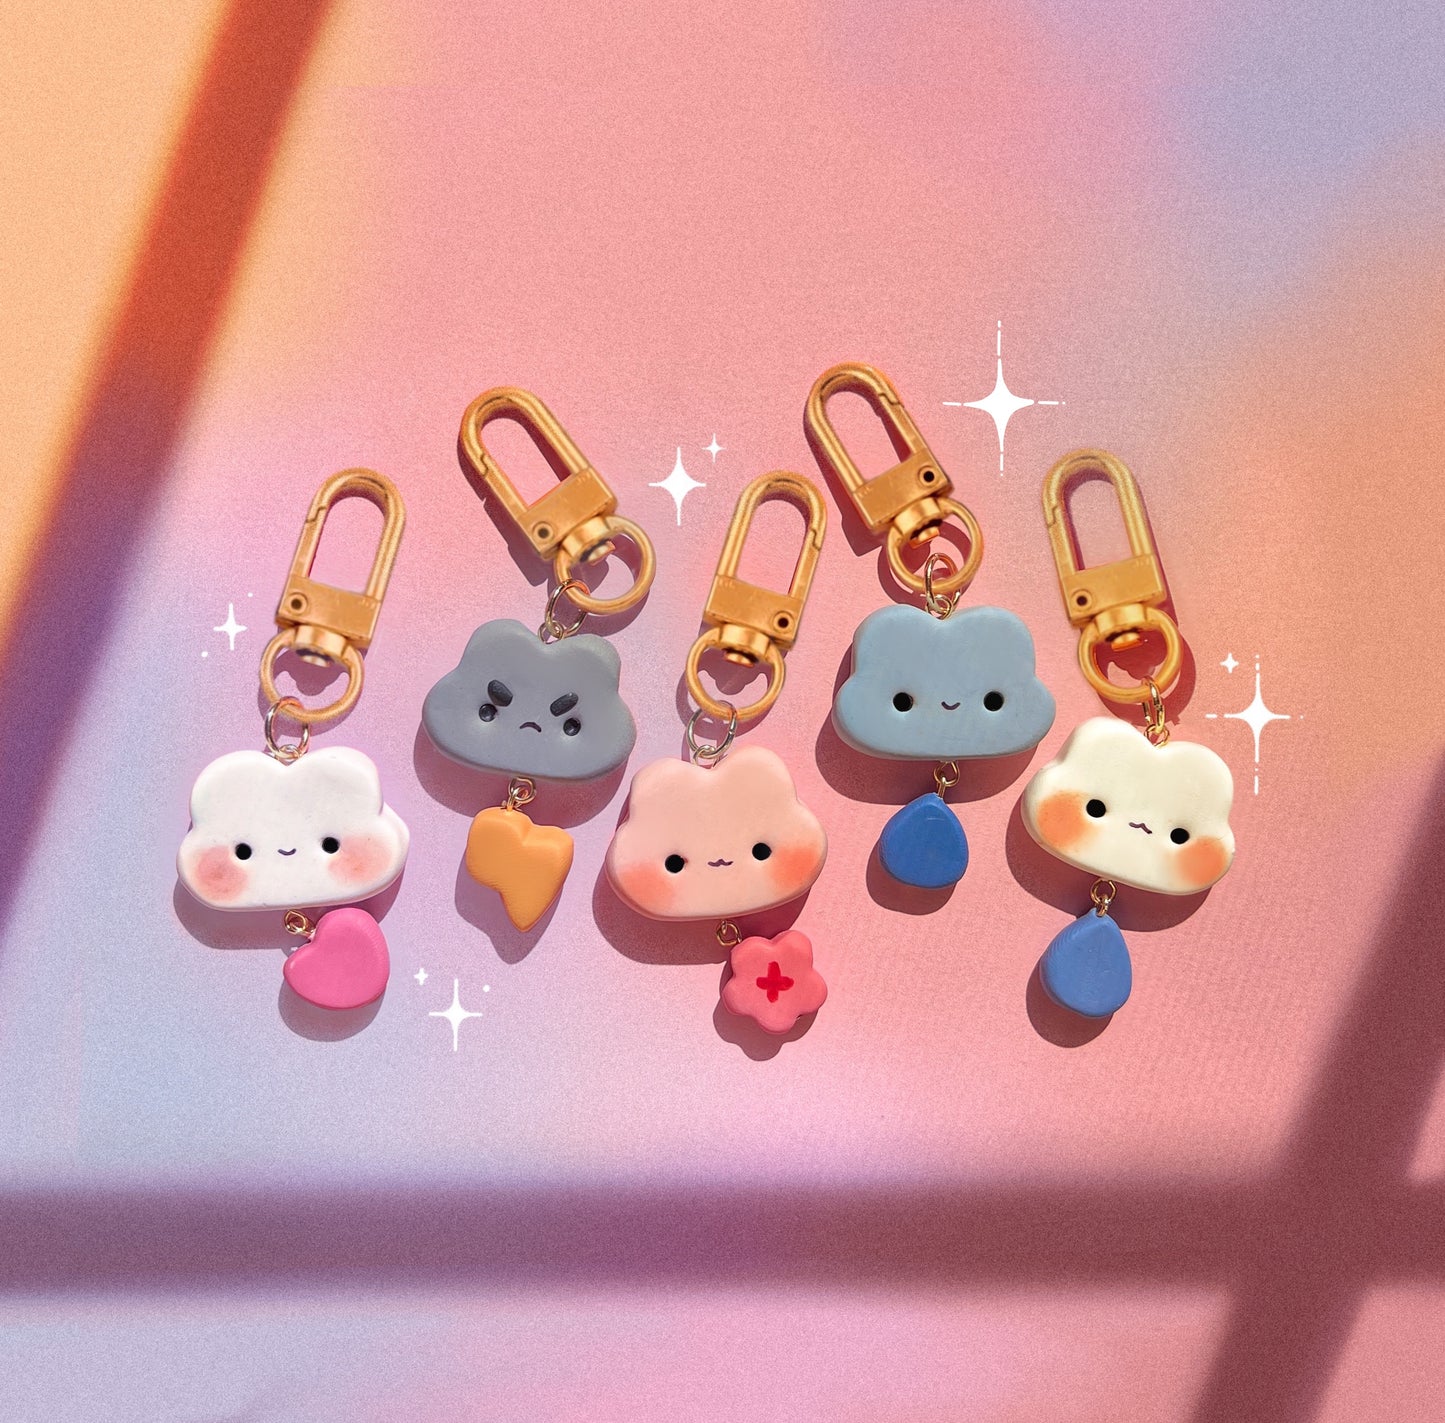 Cloudy keychains